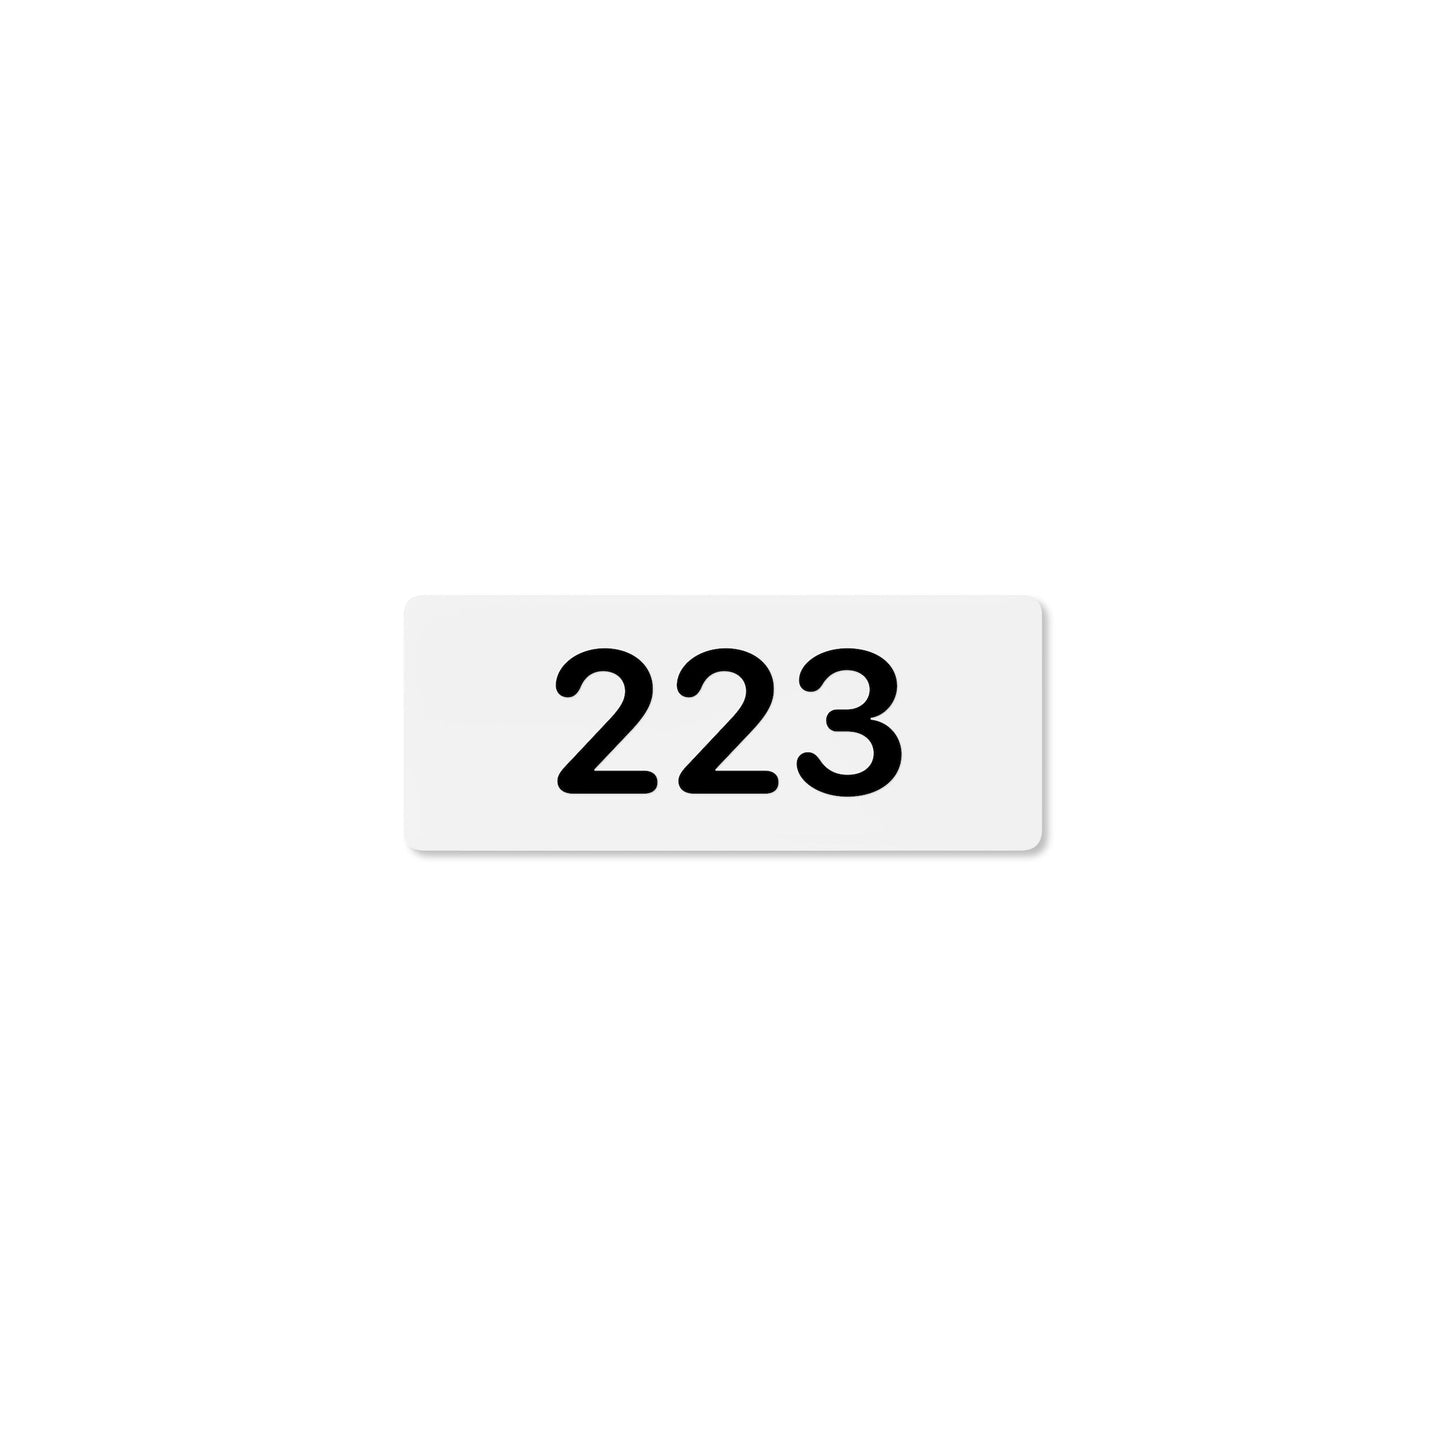 Numeral 223